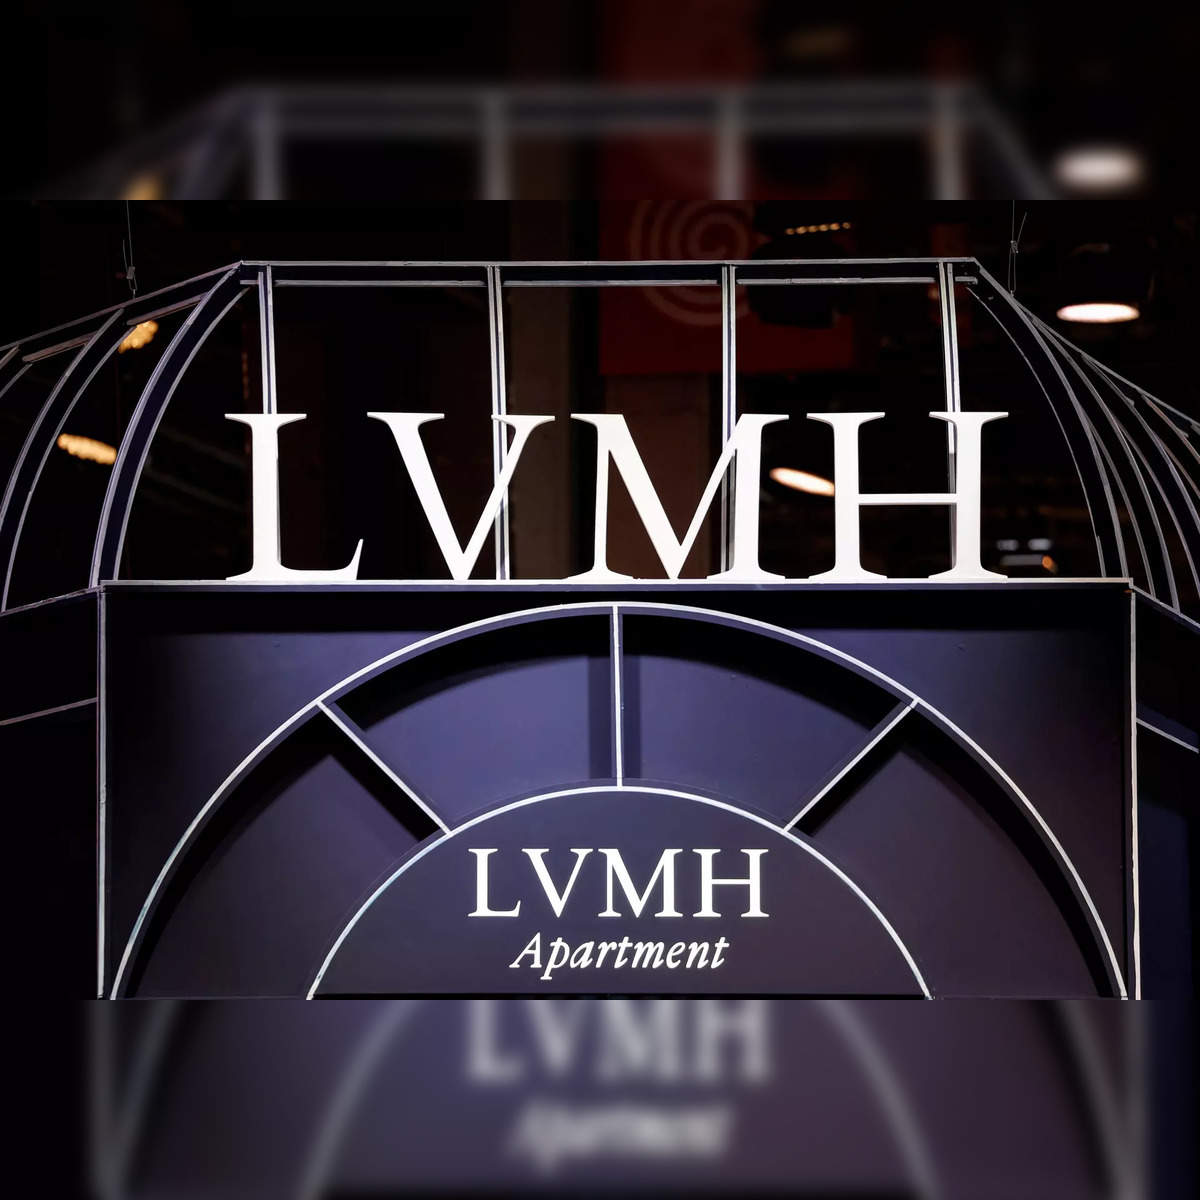 10 most popular luxury brands in the world, ranked: from LVMH's